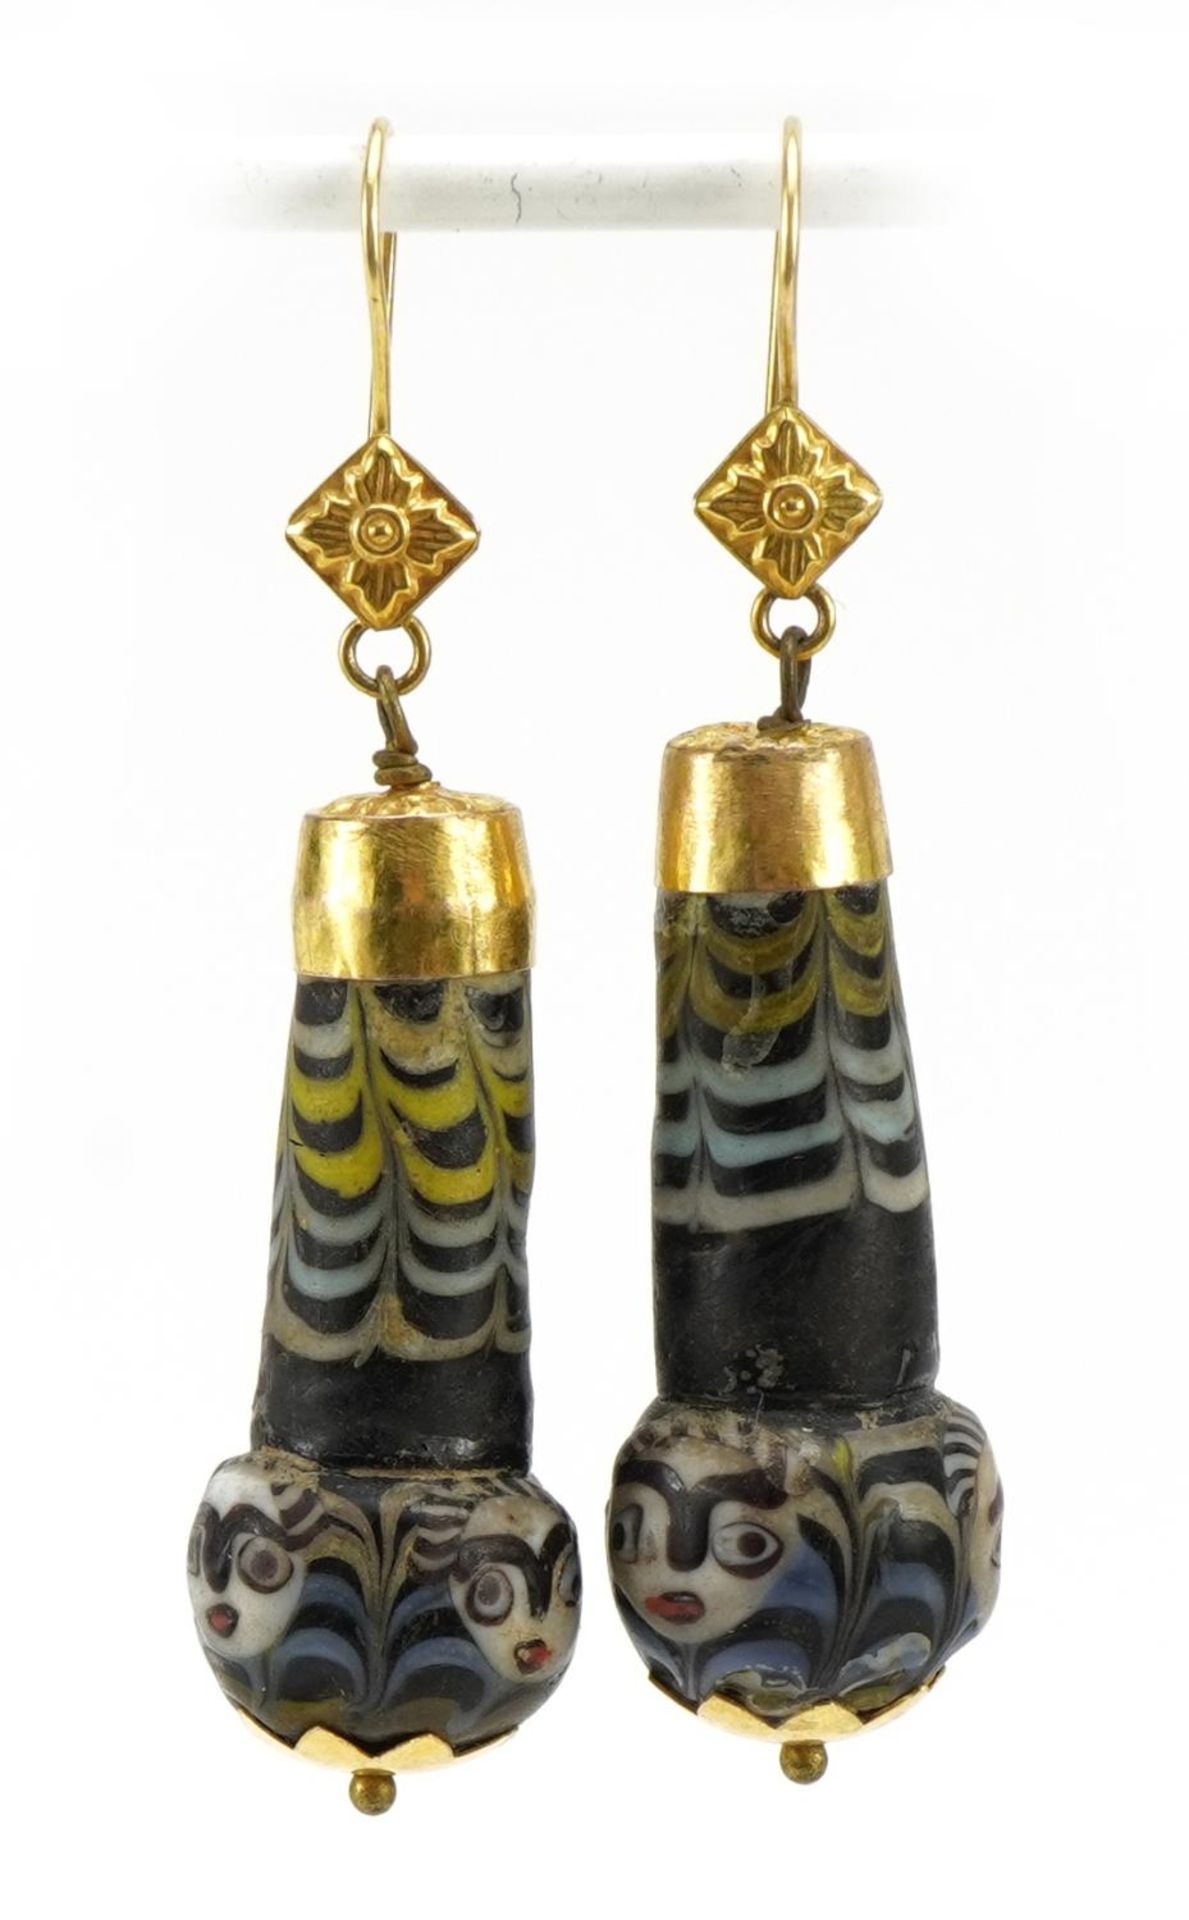 Pair of unmarked gold Islamic glass bead drop earrings, 6cm high, 15.6g : For further information on